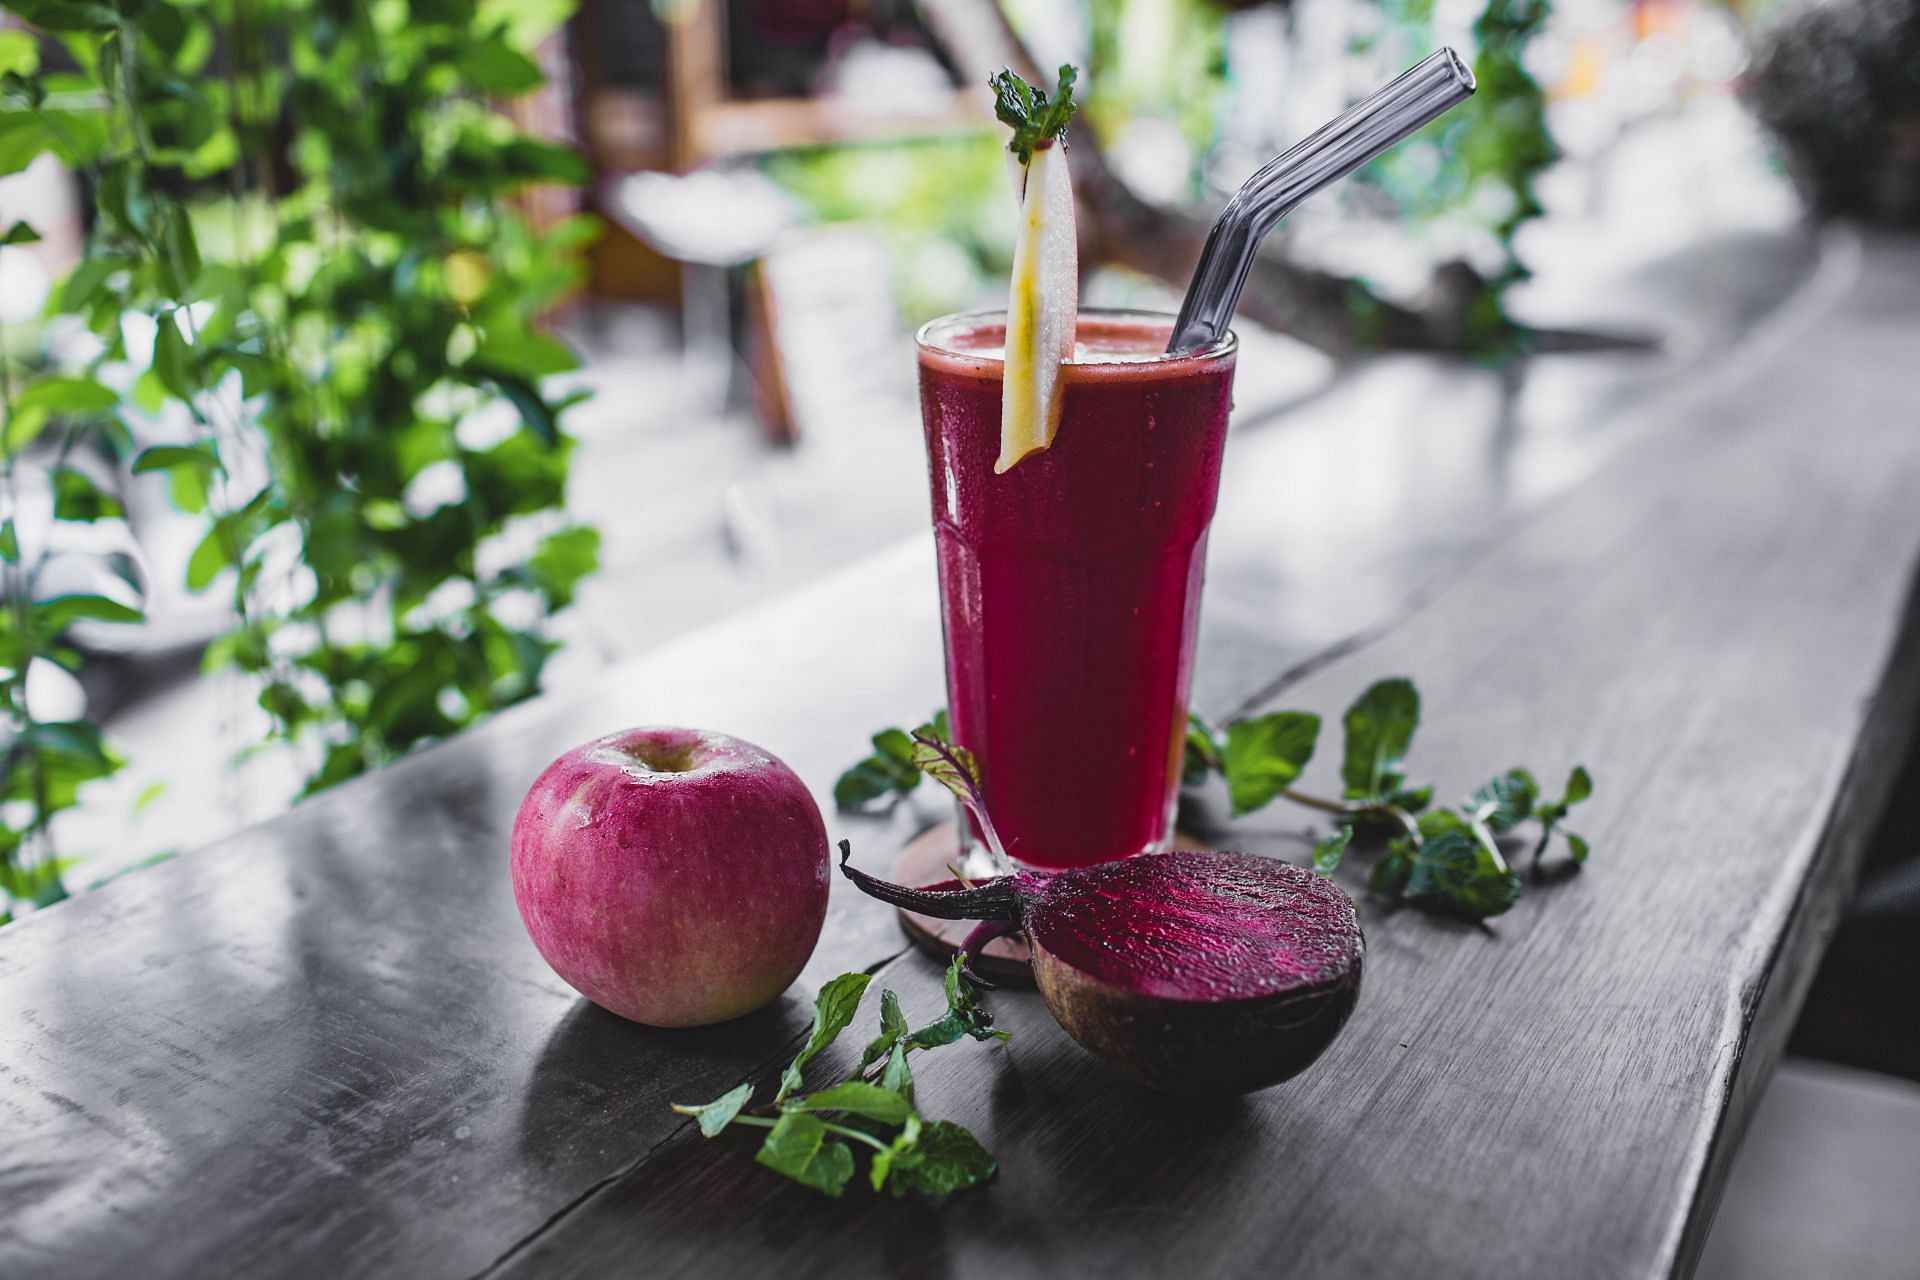 Beetroot benefits your skin as well as over well being. (Image via Pexels/ Roman Odinstov)